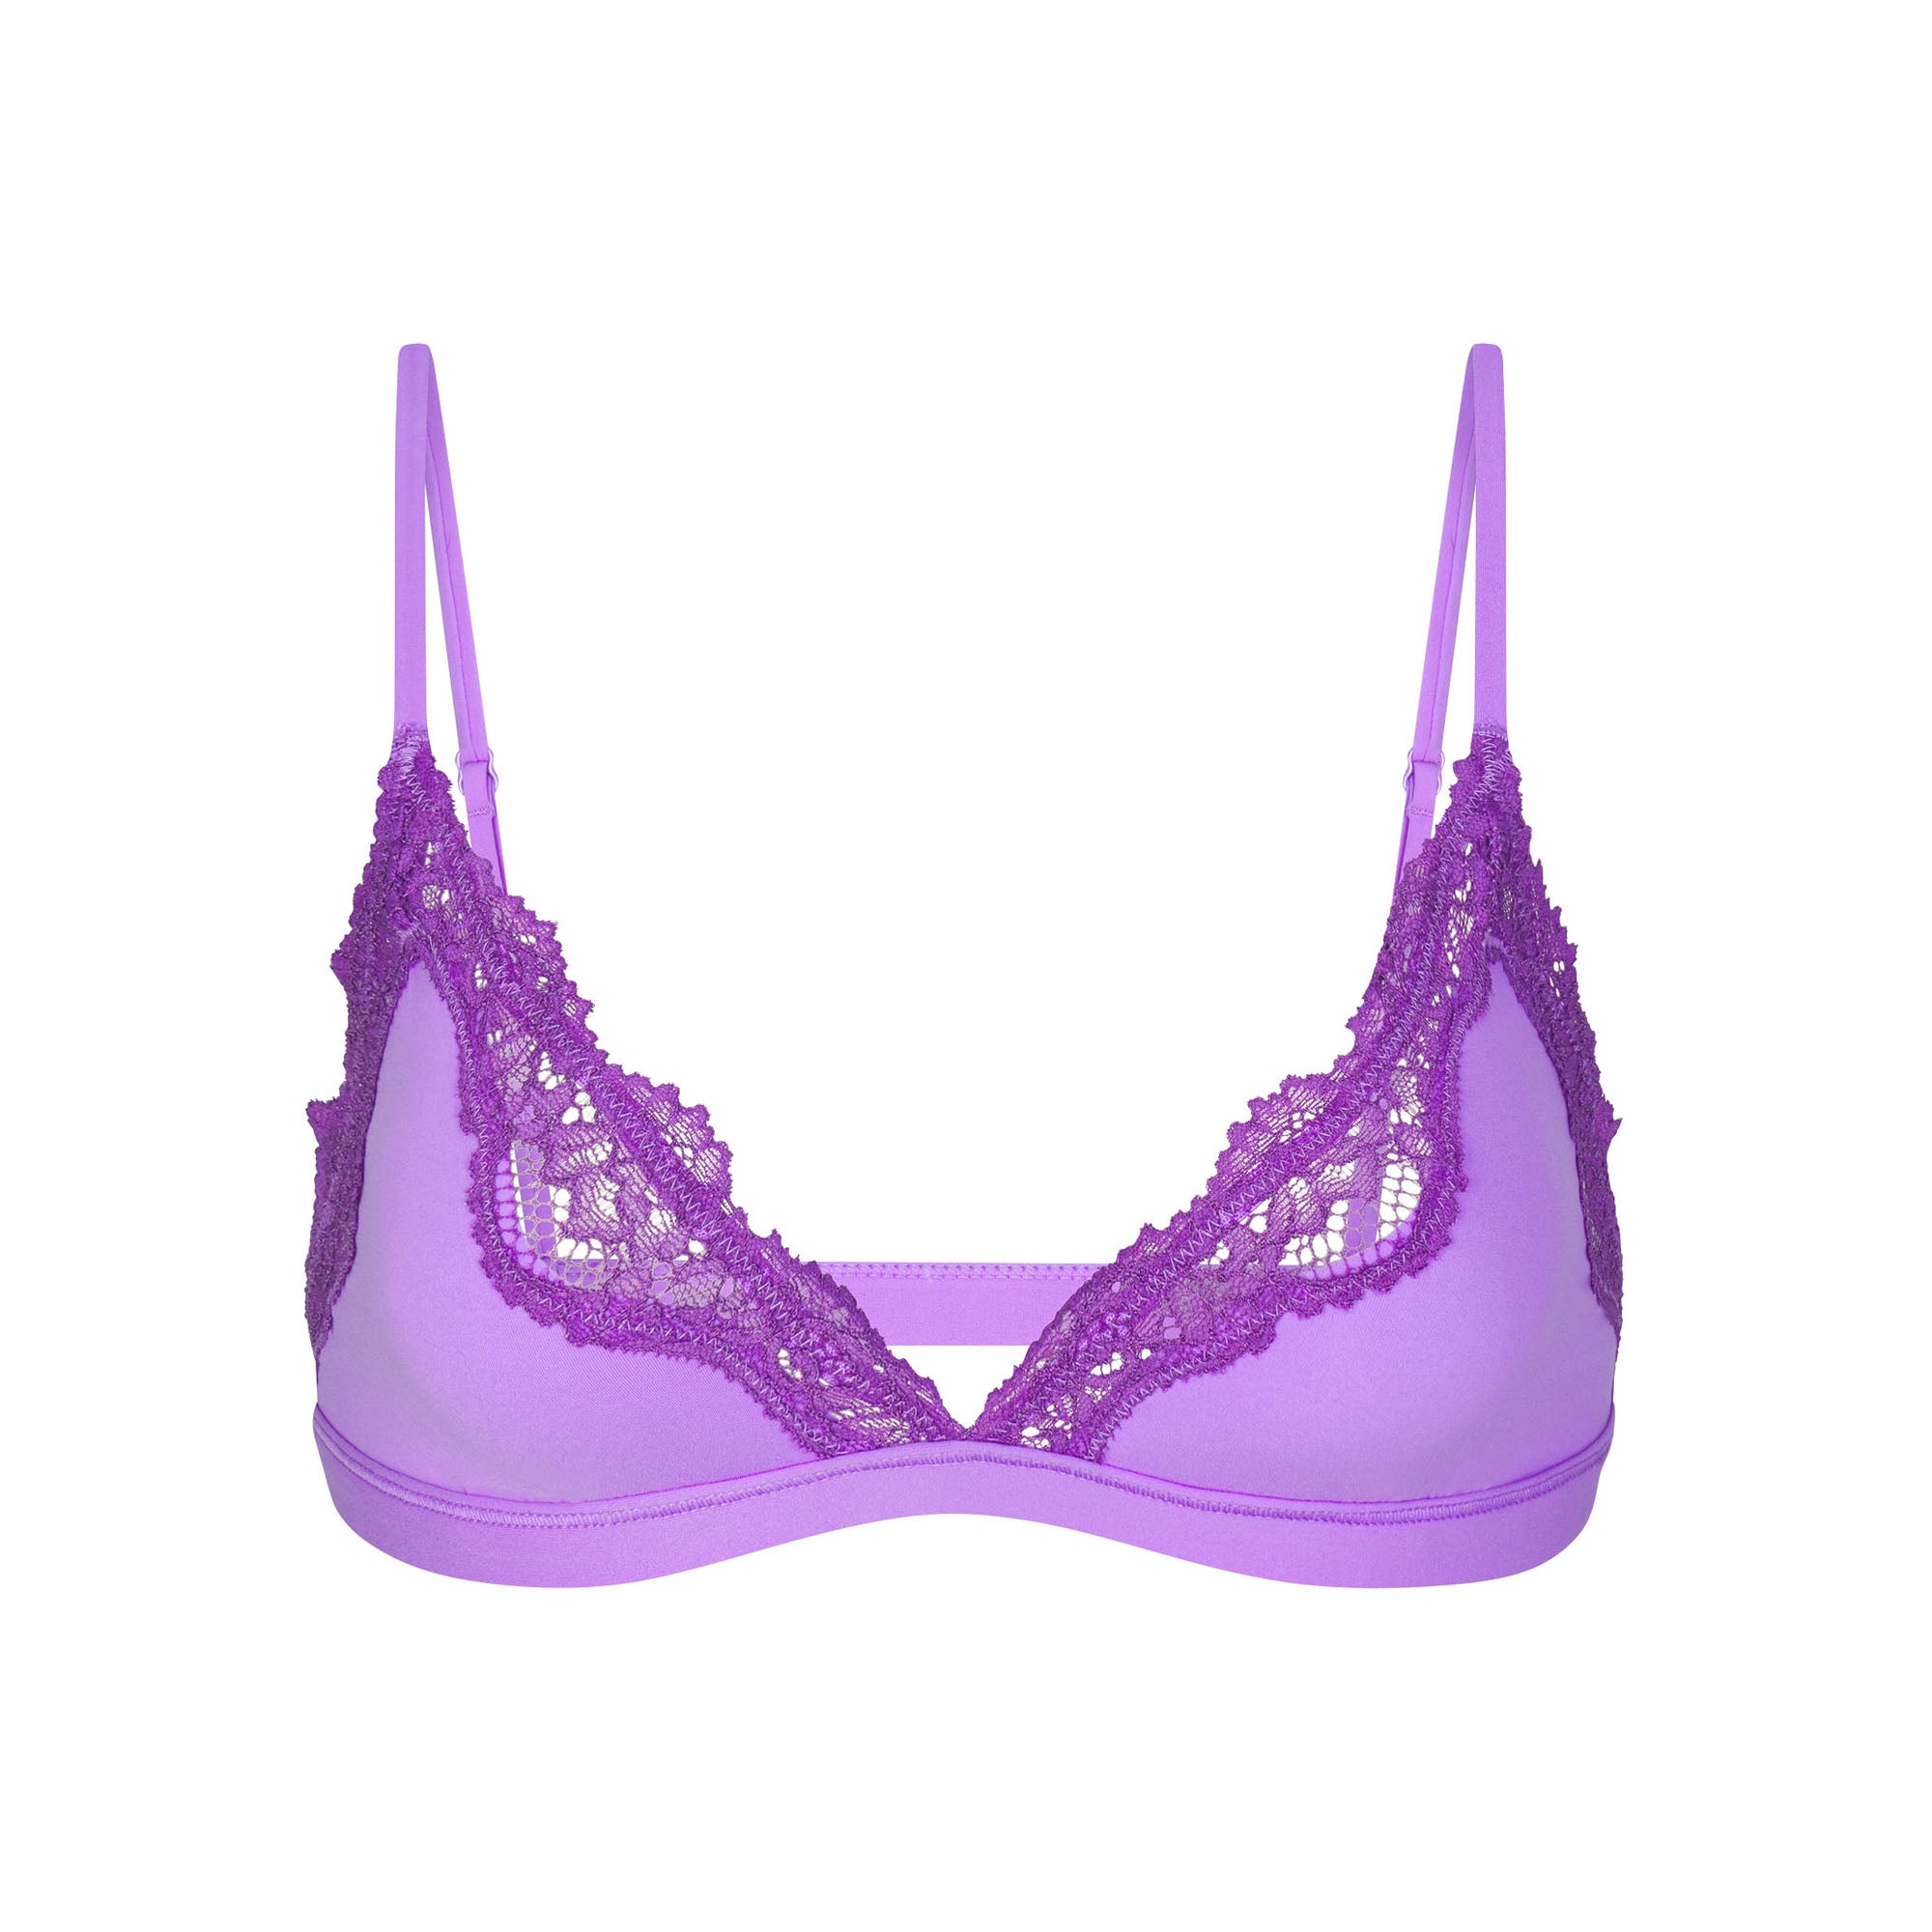 ABC Royal Lace Full Cup Mastectomía Brasier Style 509 @